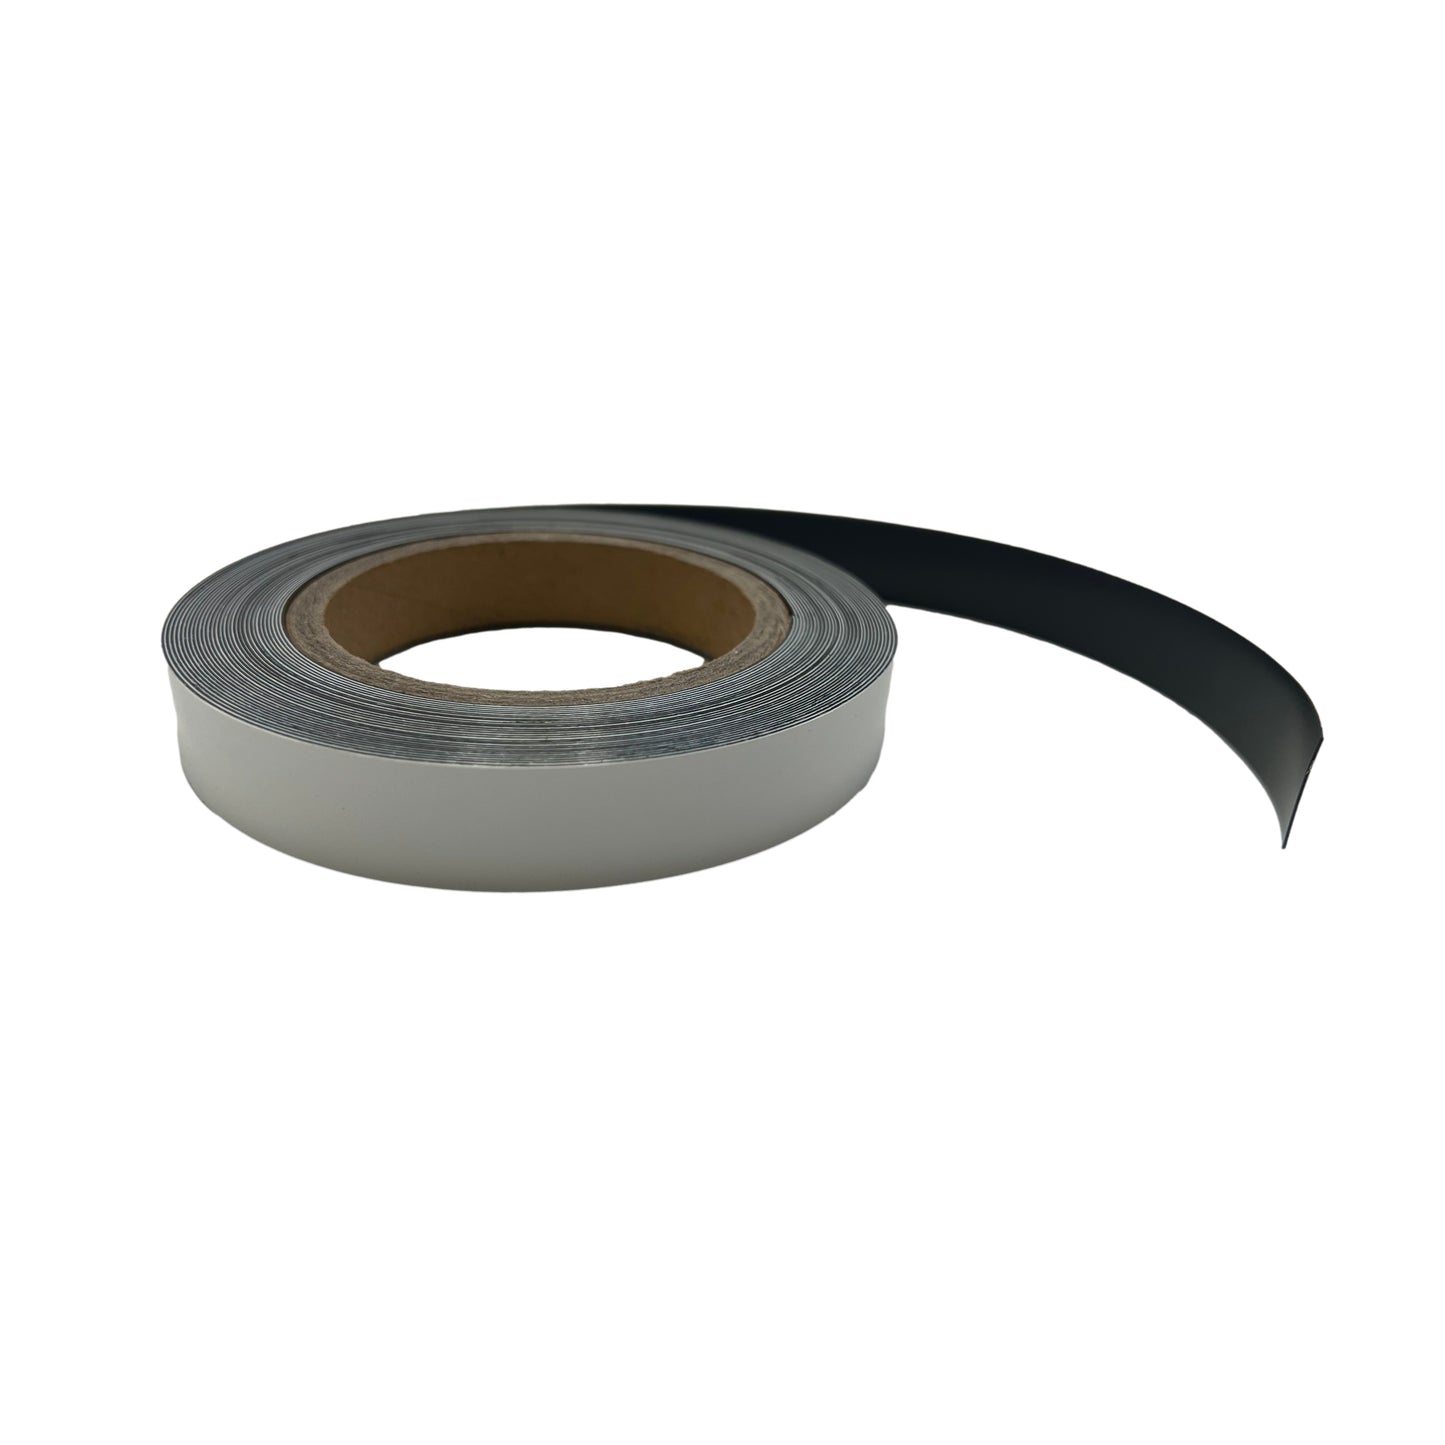 10m White Magnetic Strip Roll with Dry Wipe Clean Finish